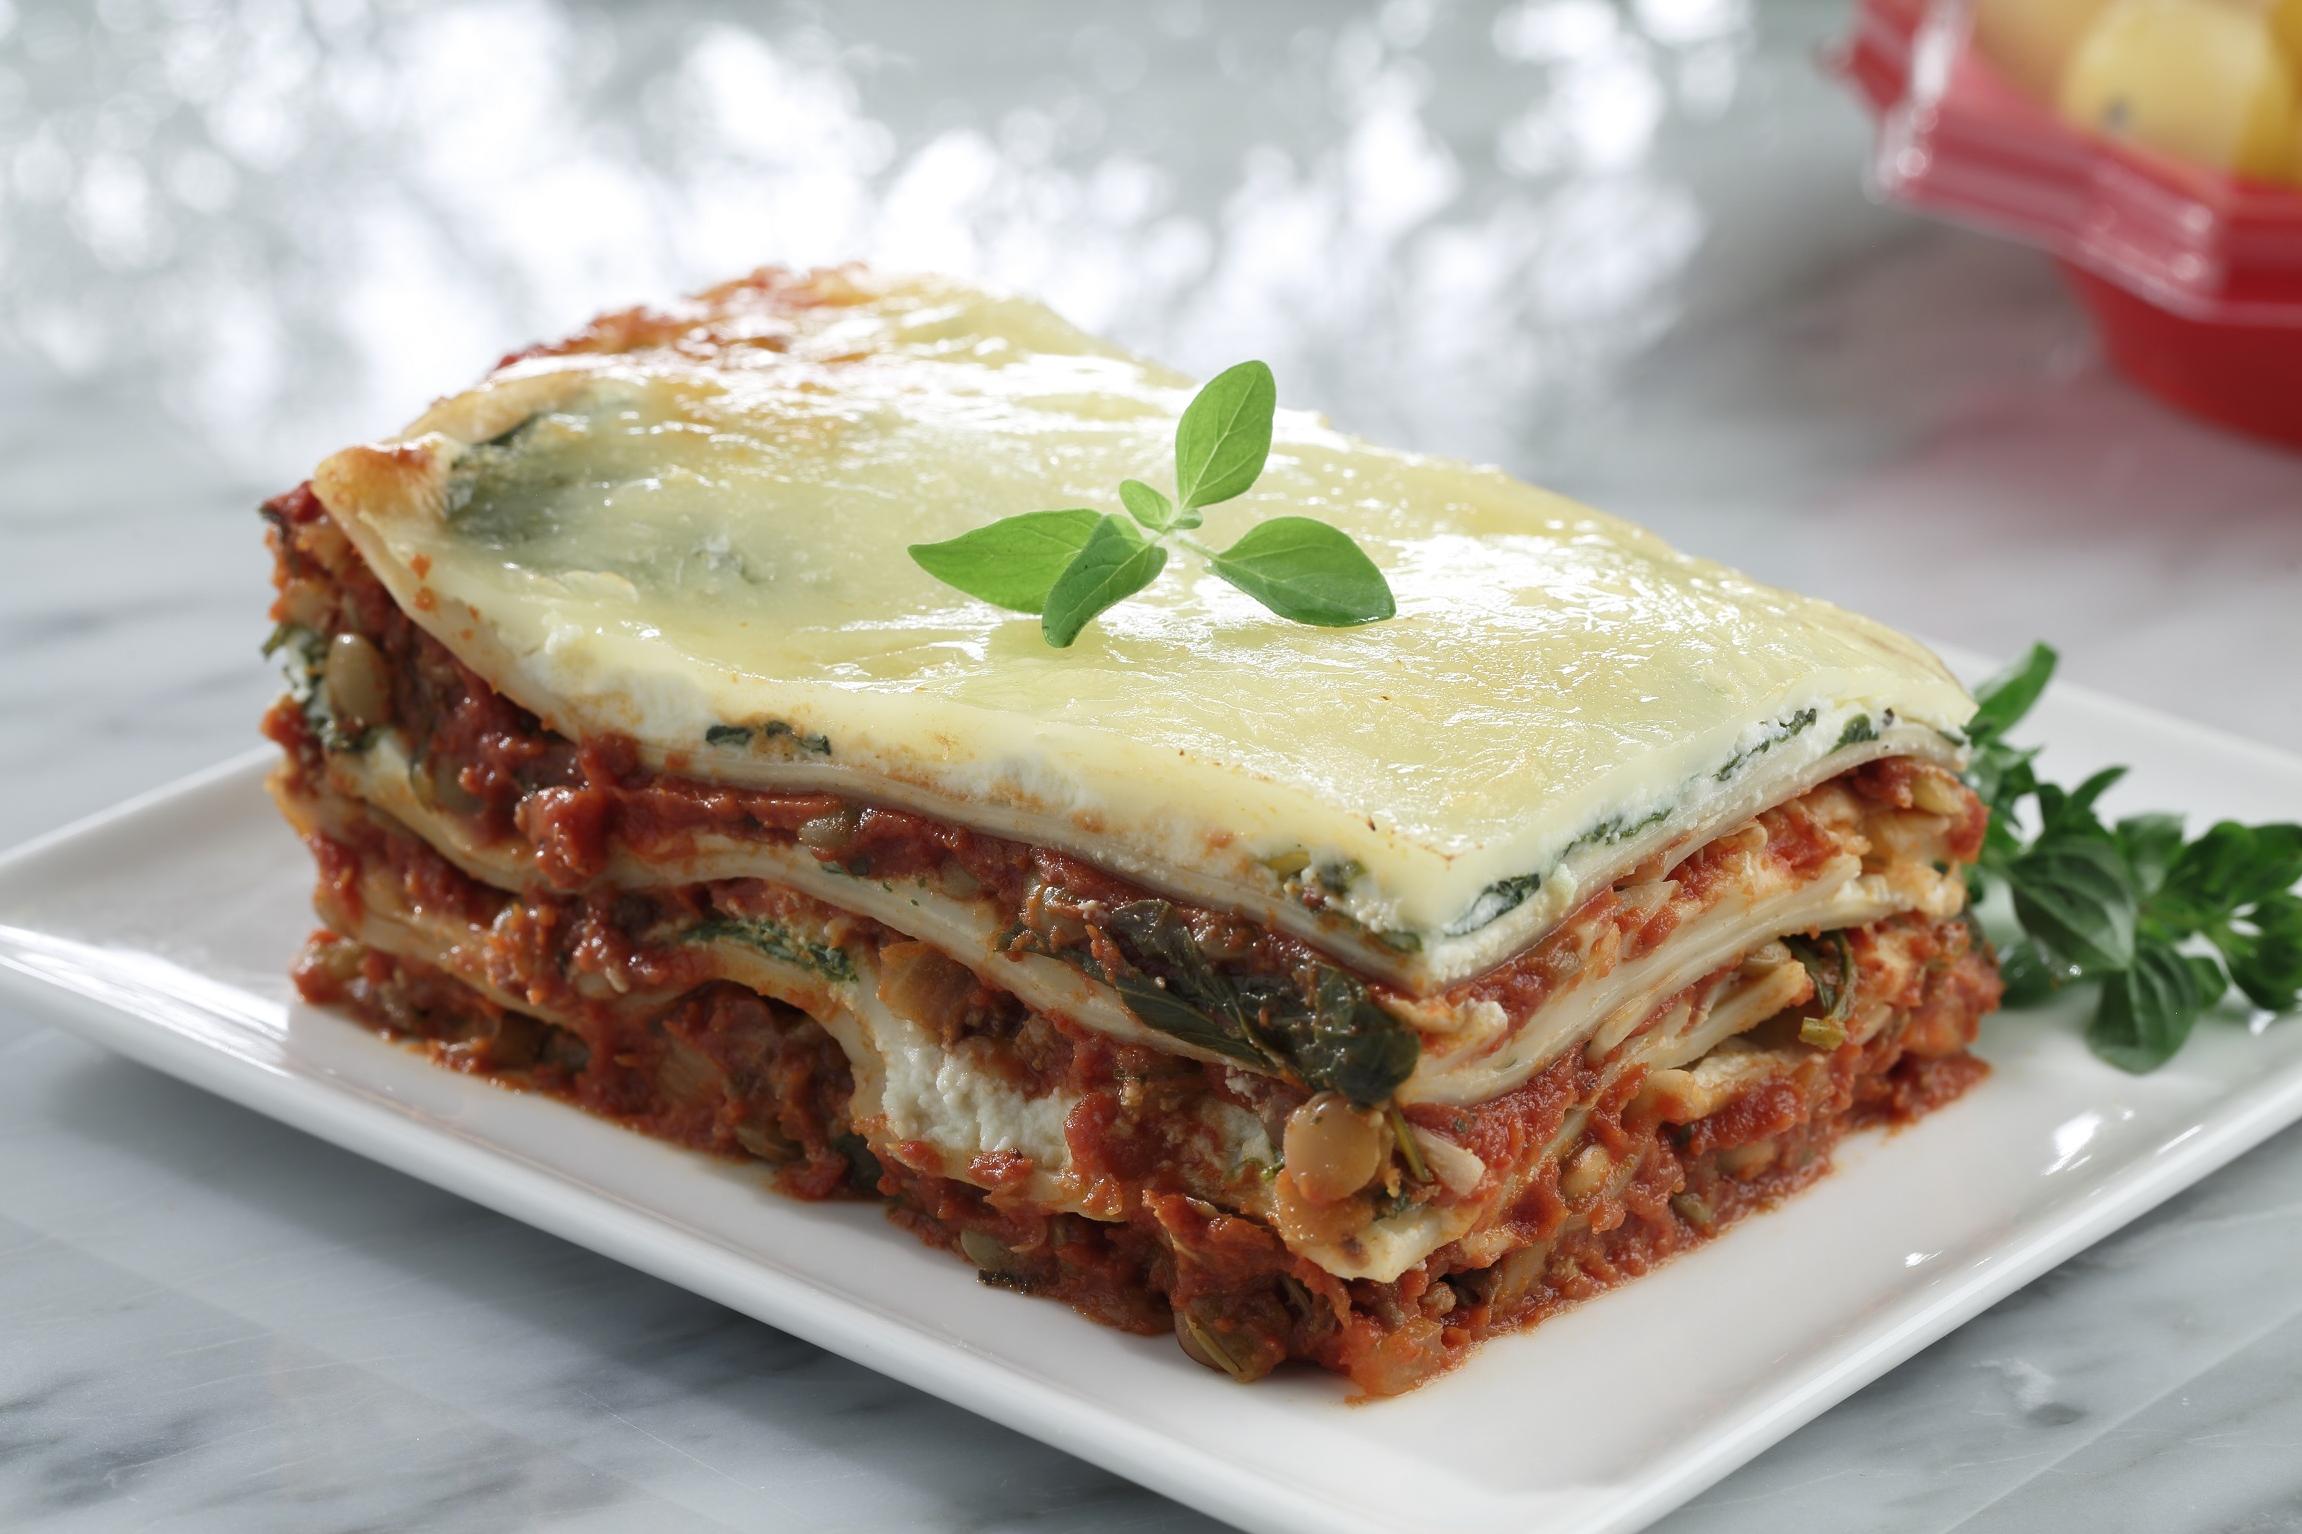  This lasagna dish is a hearty and comforting meal option for a cozy night in.